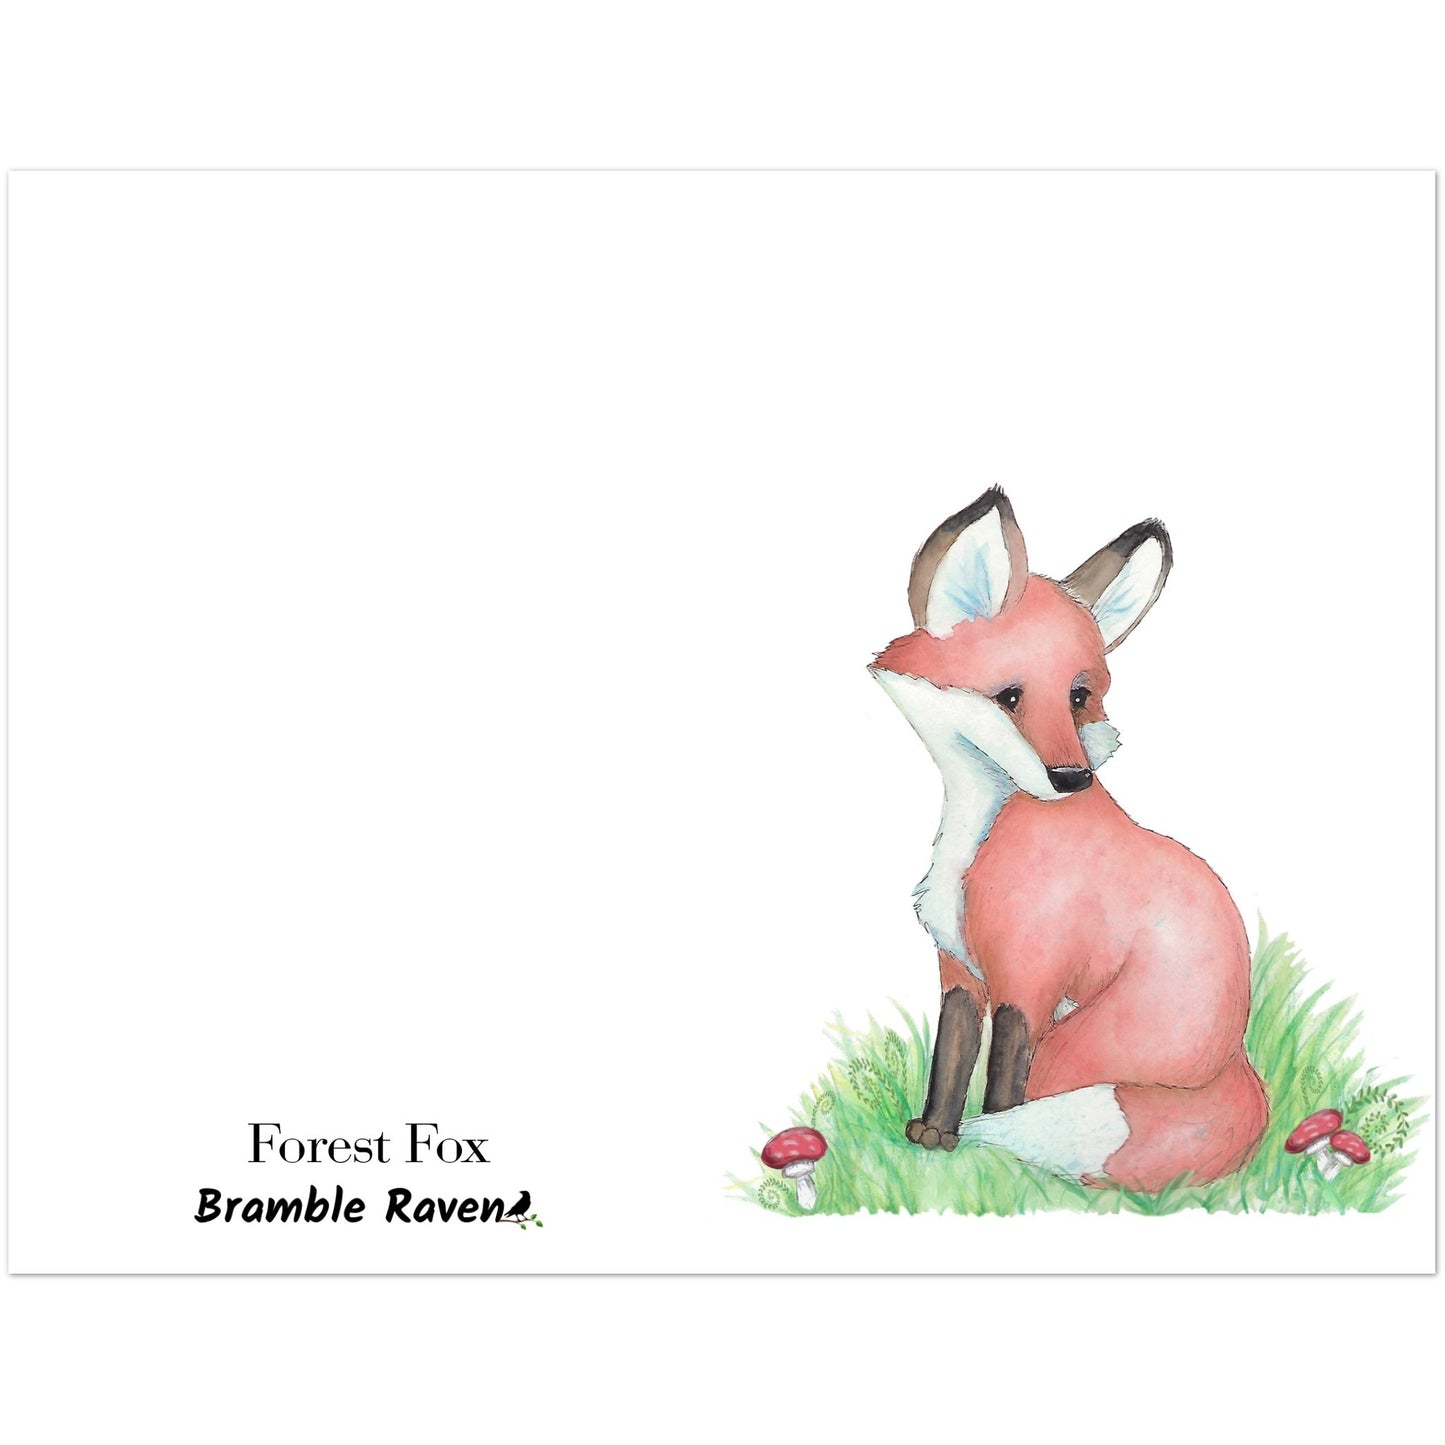 Pack of ten 5.5 x 8.5 inch greeting cards with envelopes. Front of card has watercolor fox nestled in the grass by mushrooms and ferns. Inside is blank. Cards are 130 lb 350 gsm coated paperboard with vibrant printing.  